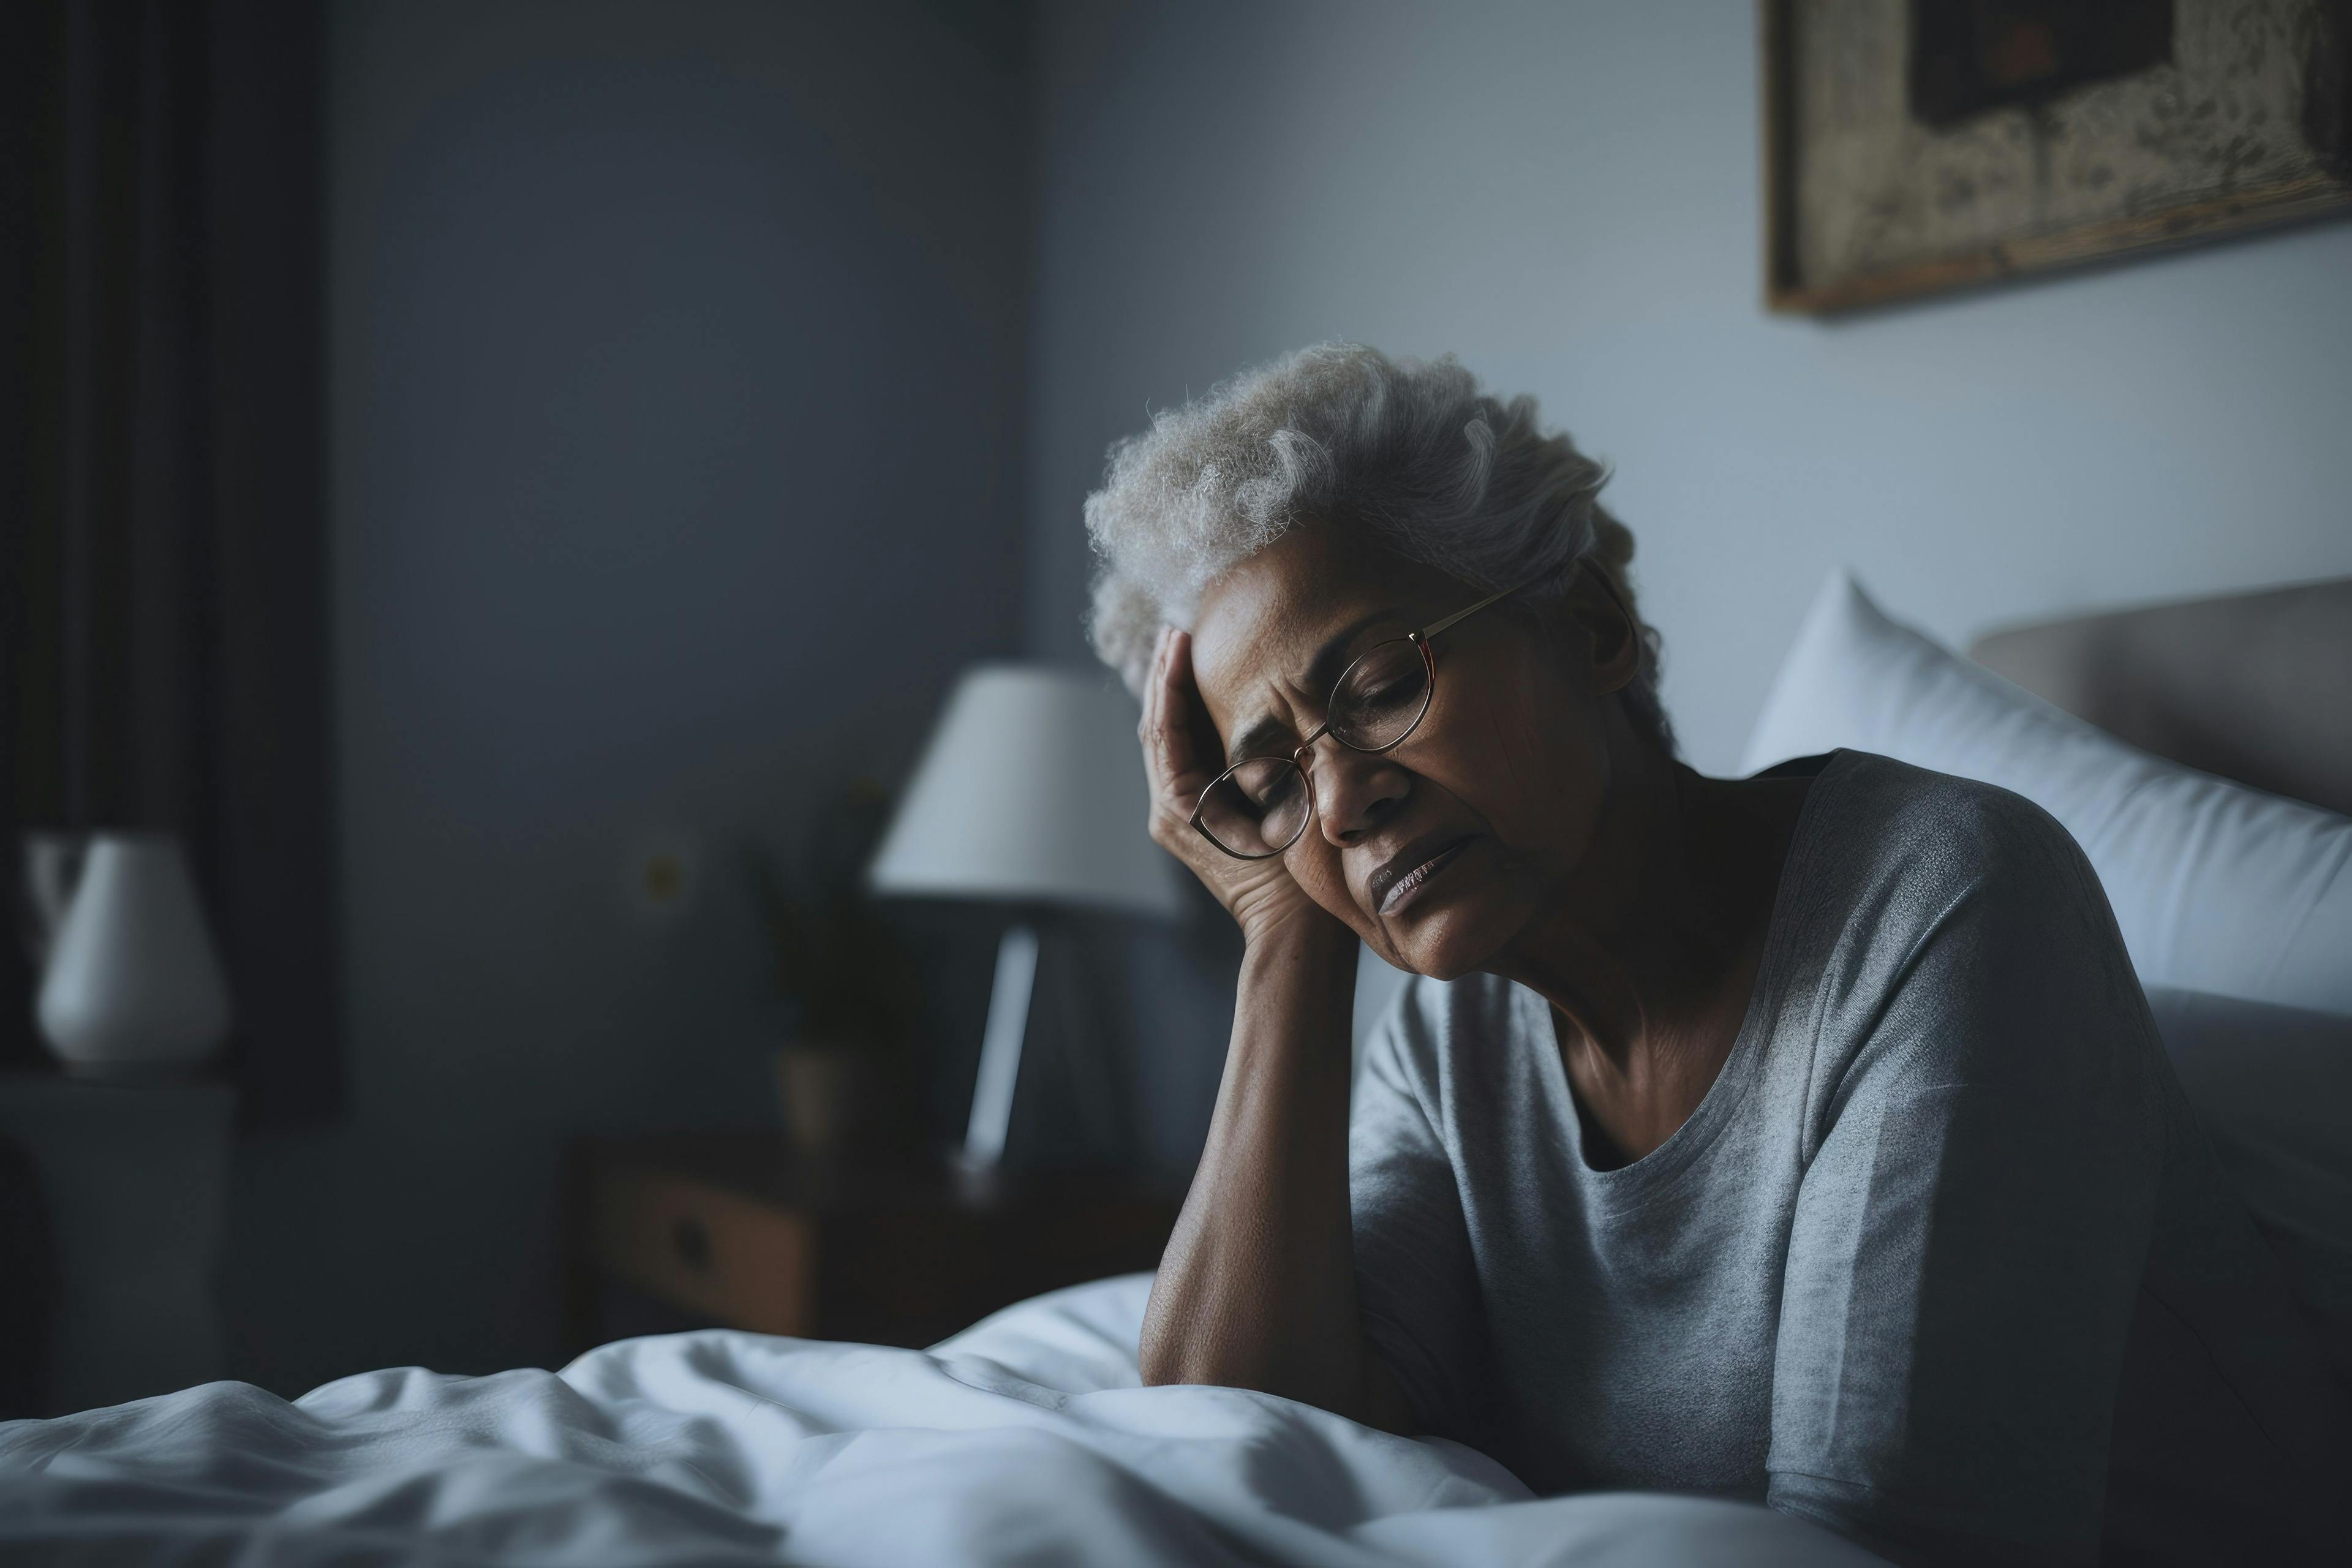 Senior woman having a headache and feeling sick in the bedroom at home - Image credit: Baba Images | stock.adobe.com